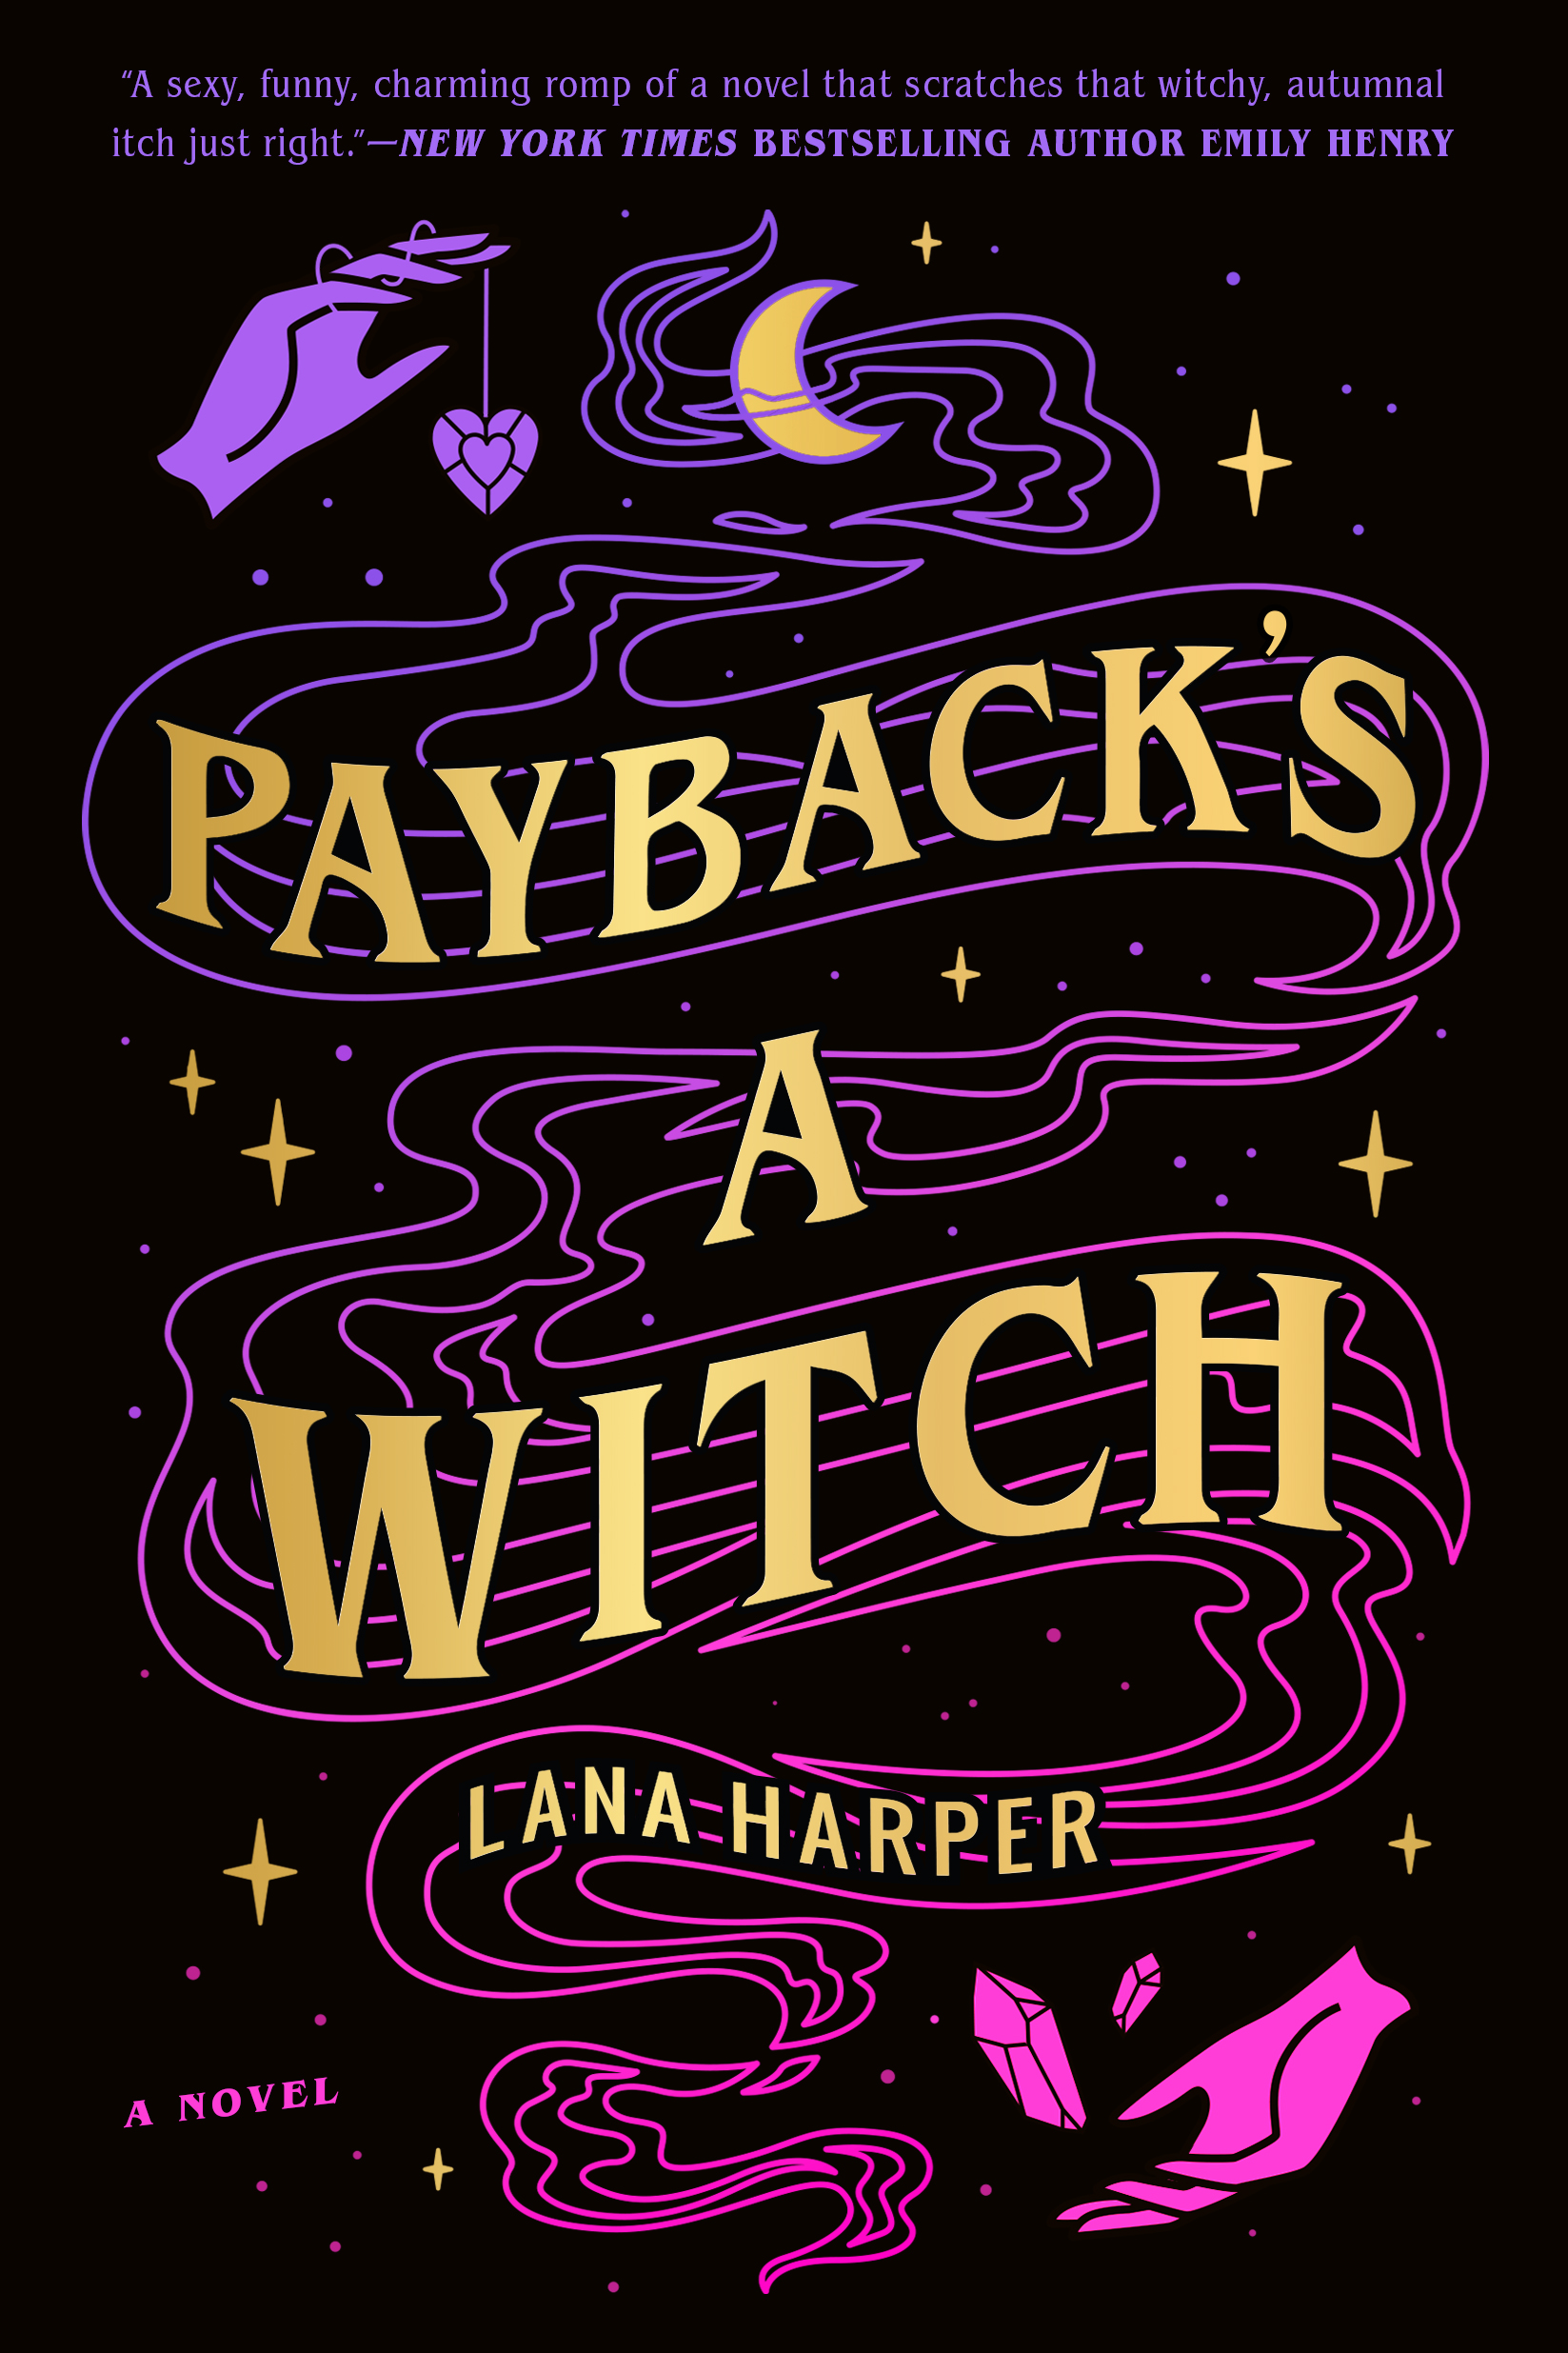 Image for "Payback's a Witch"